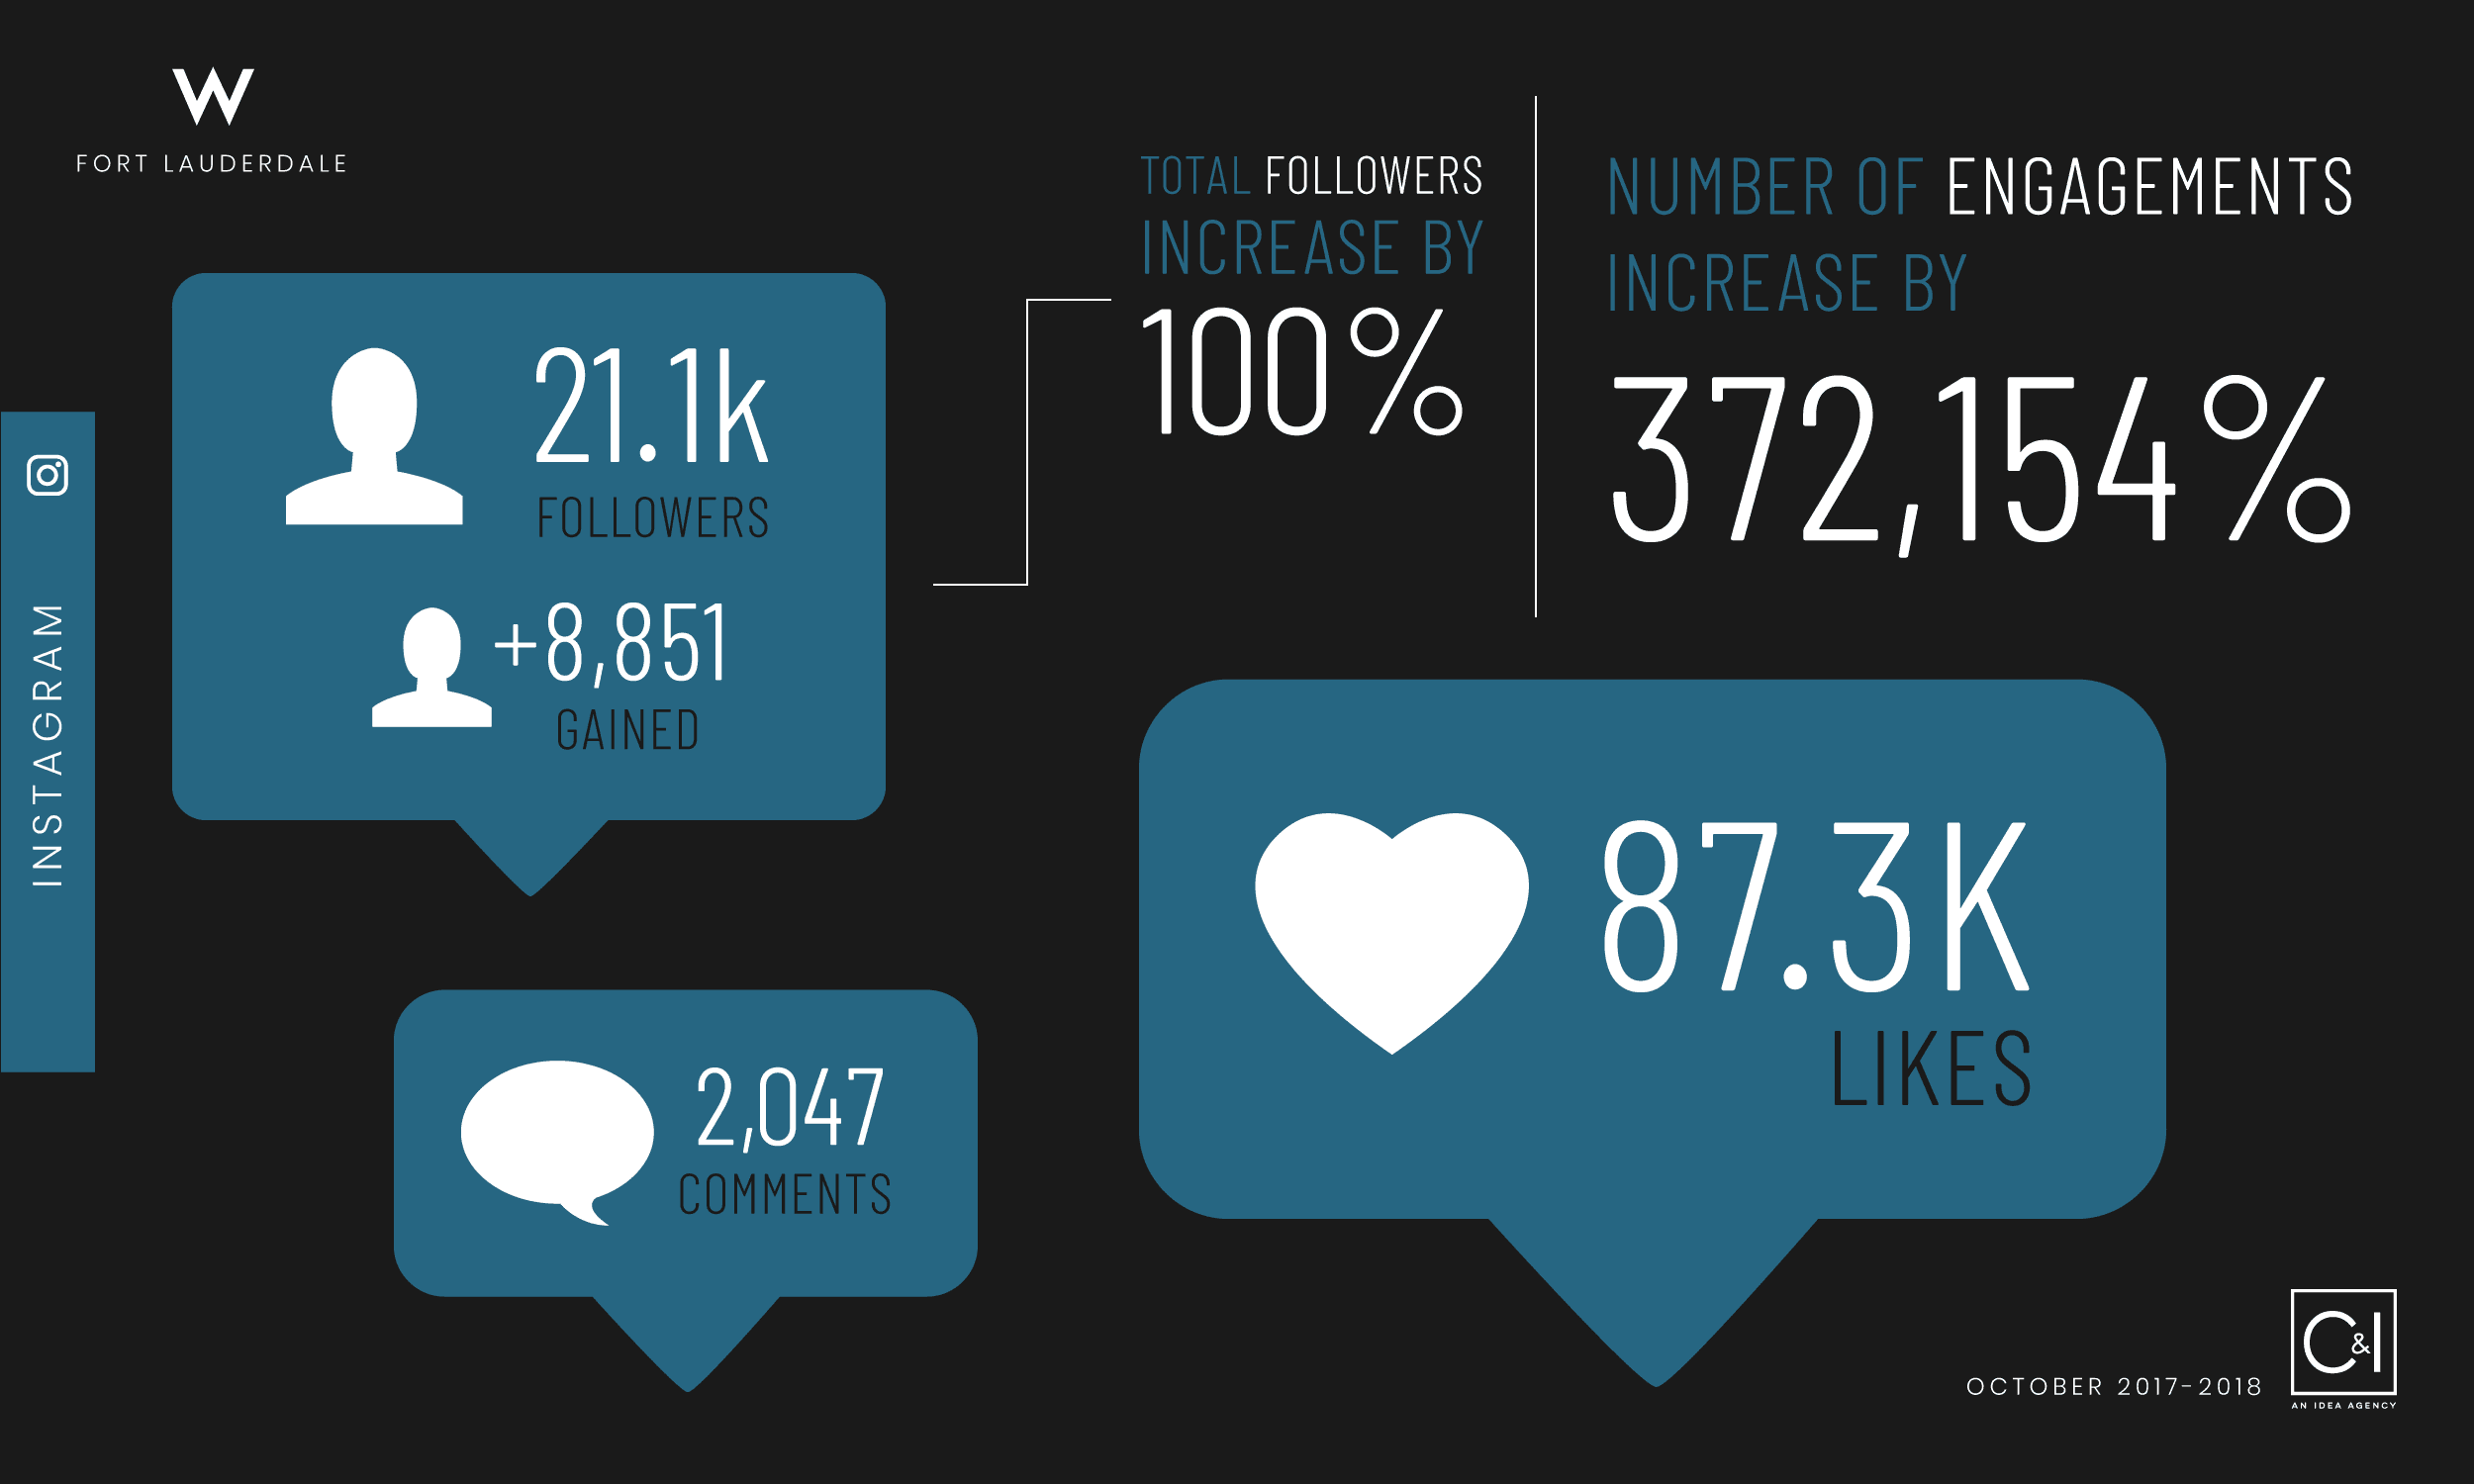 Instagram Engagements for October 2017 through 2018 for W Fort Lauderdale